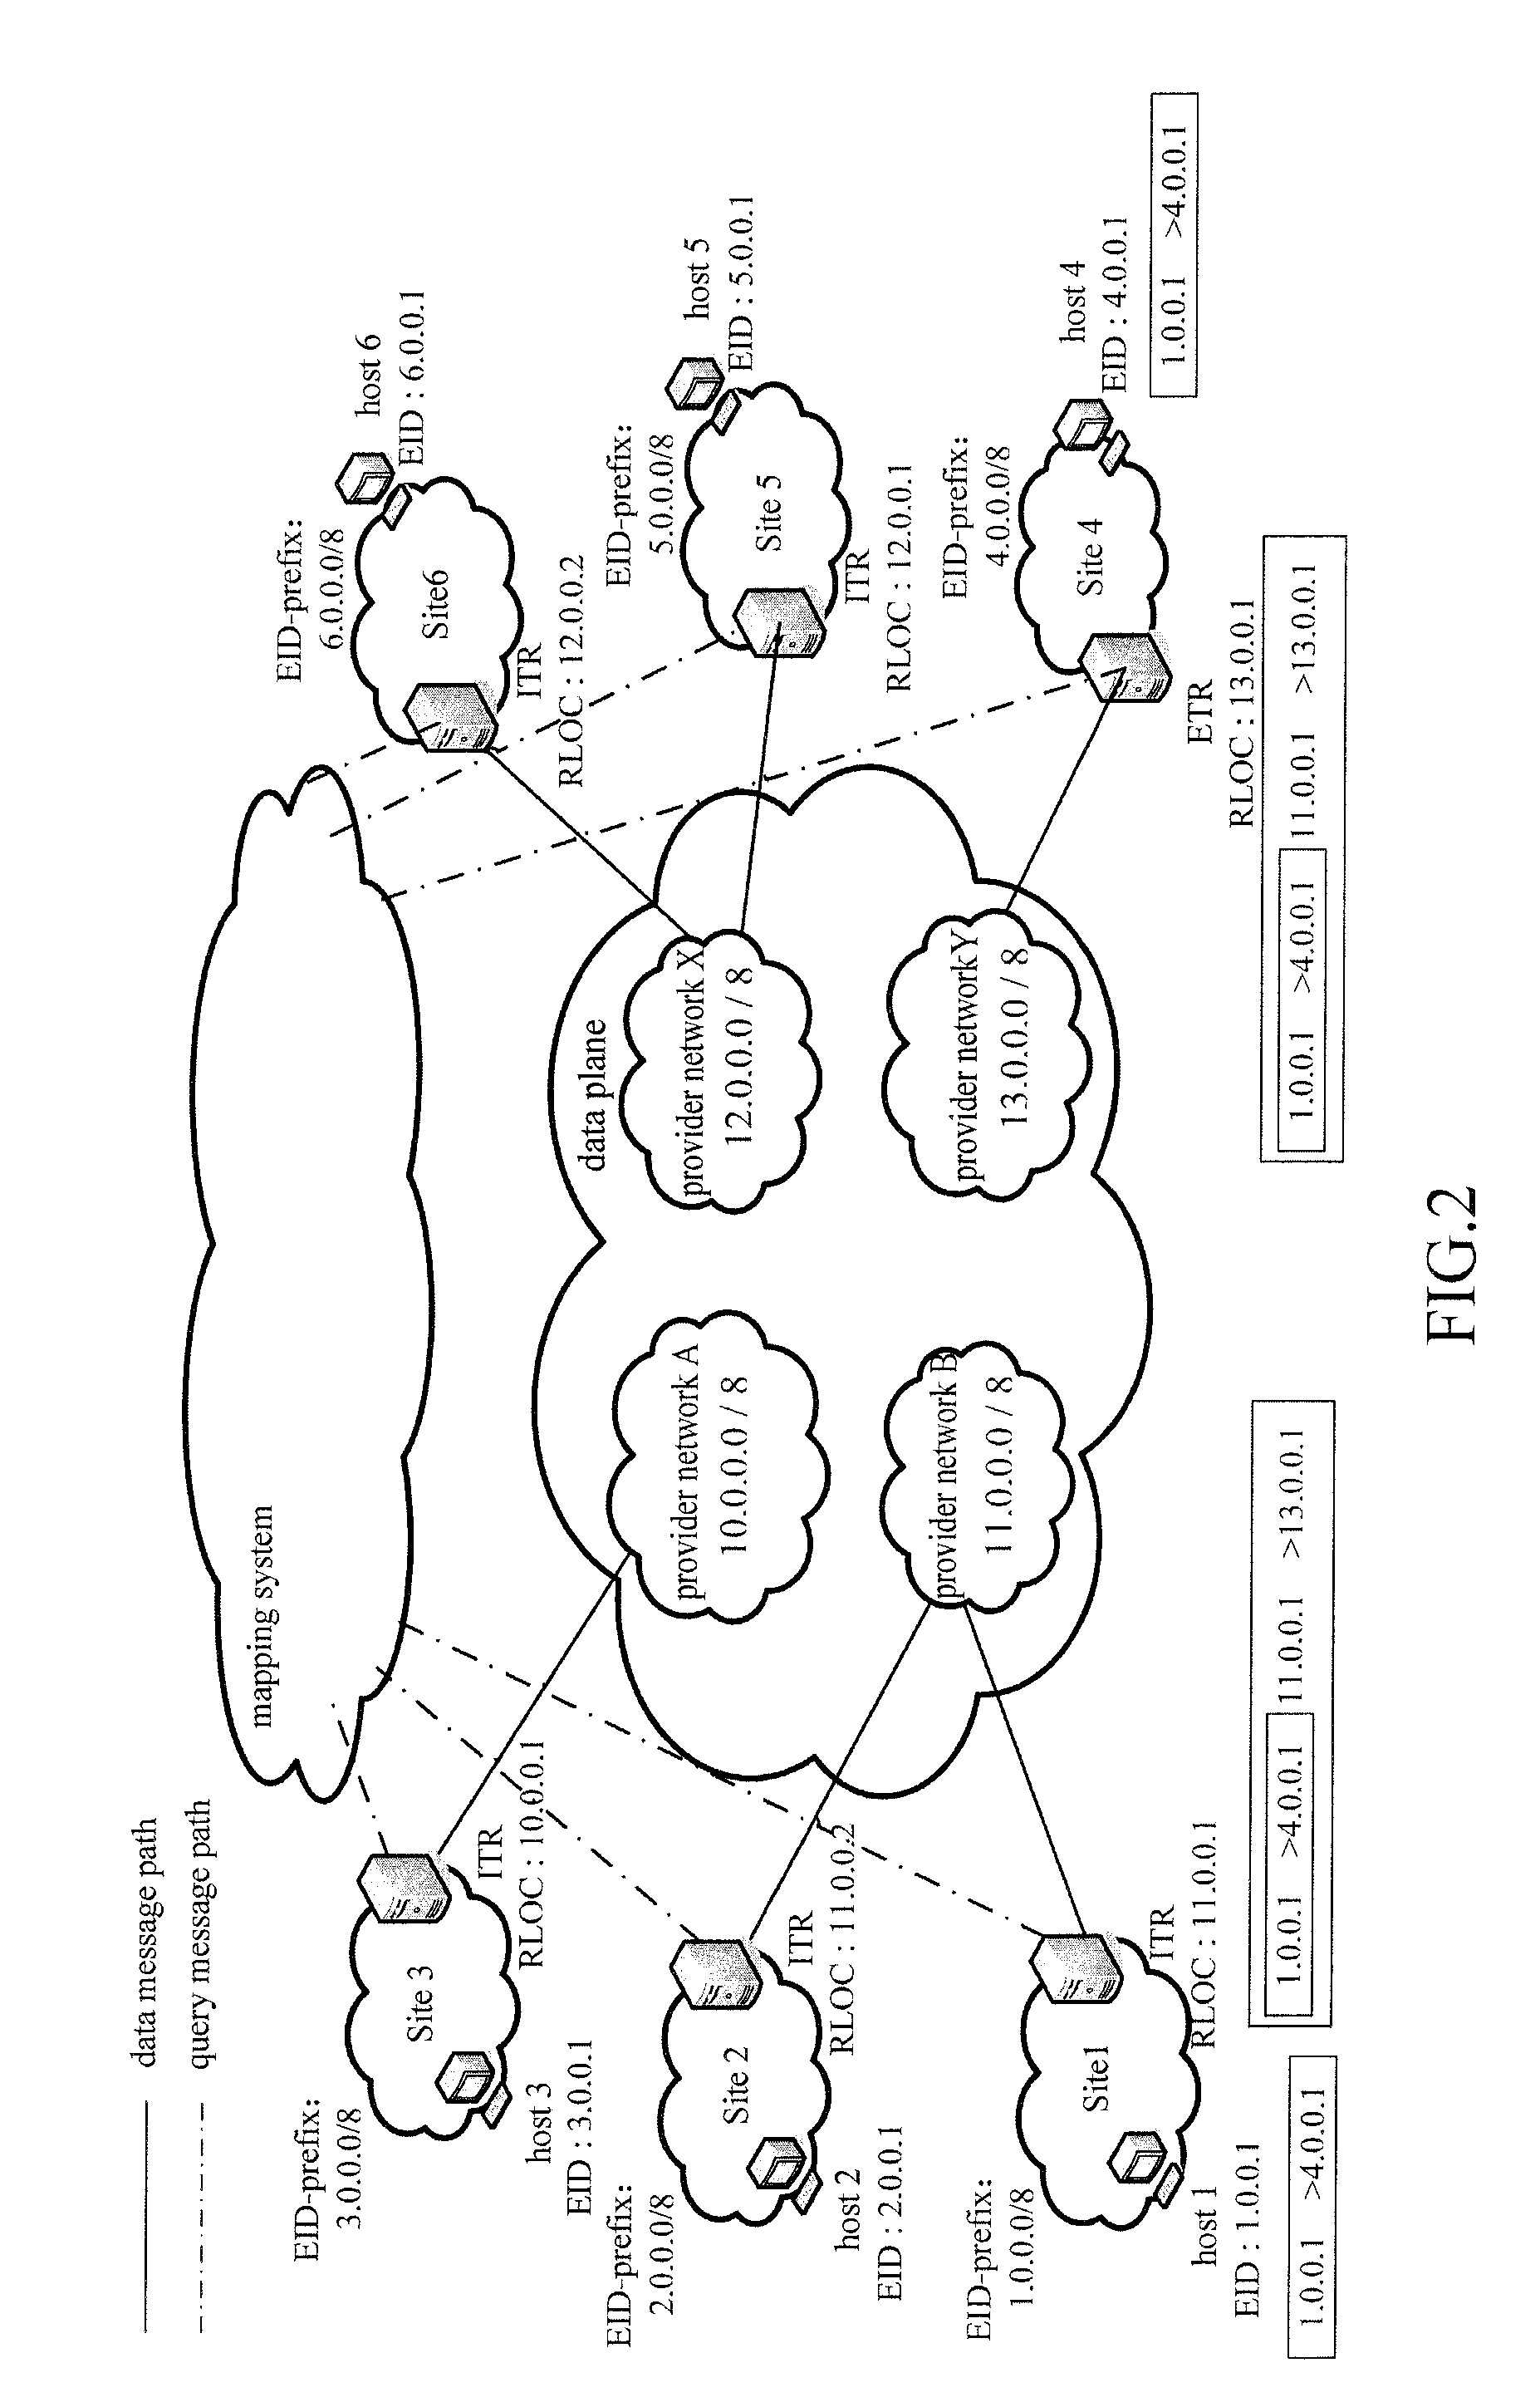 Method for network anomaly detection in a network architecture based on locator/identifier split